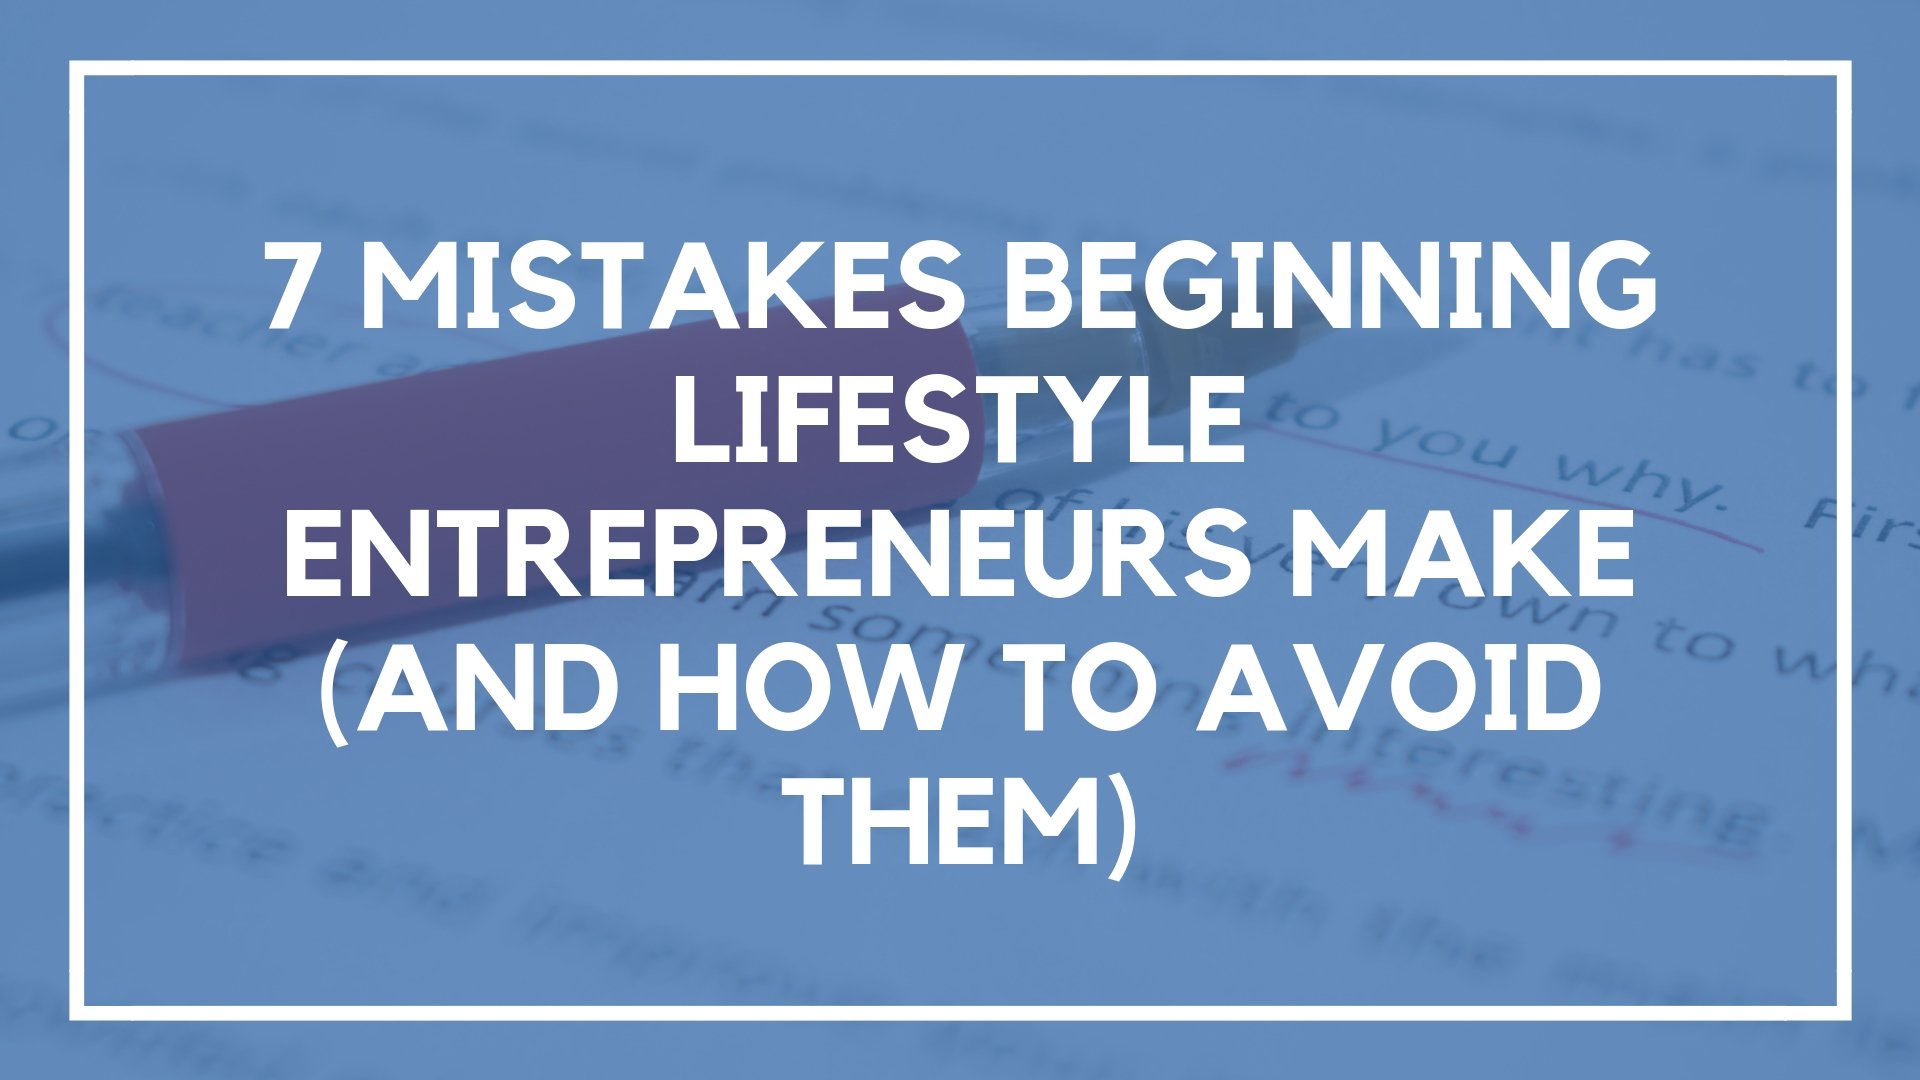 7 Mistakes Beginning Lifestyle Entrepreneurs Make (And How to Avoid Them)